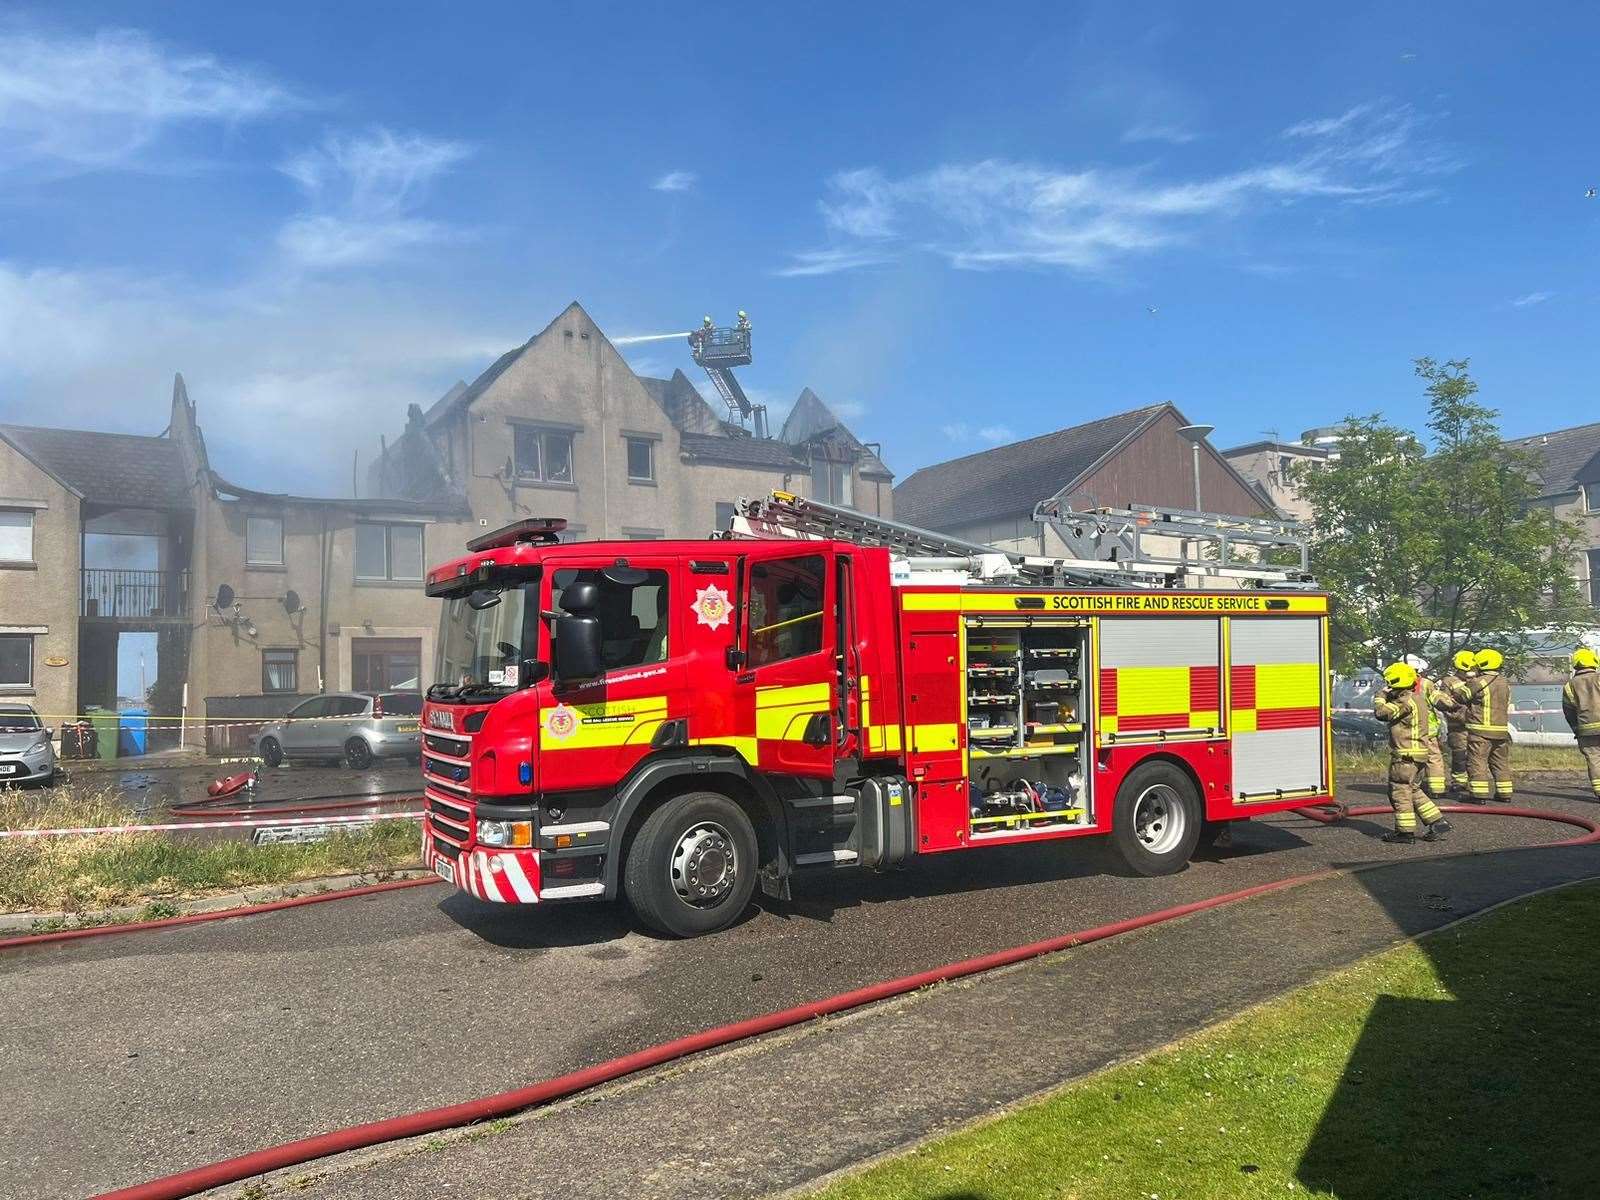 Fire crews for both Nairn and as far afield as Aberdeen were deployed at the scene.